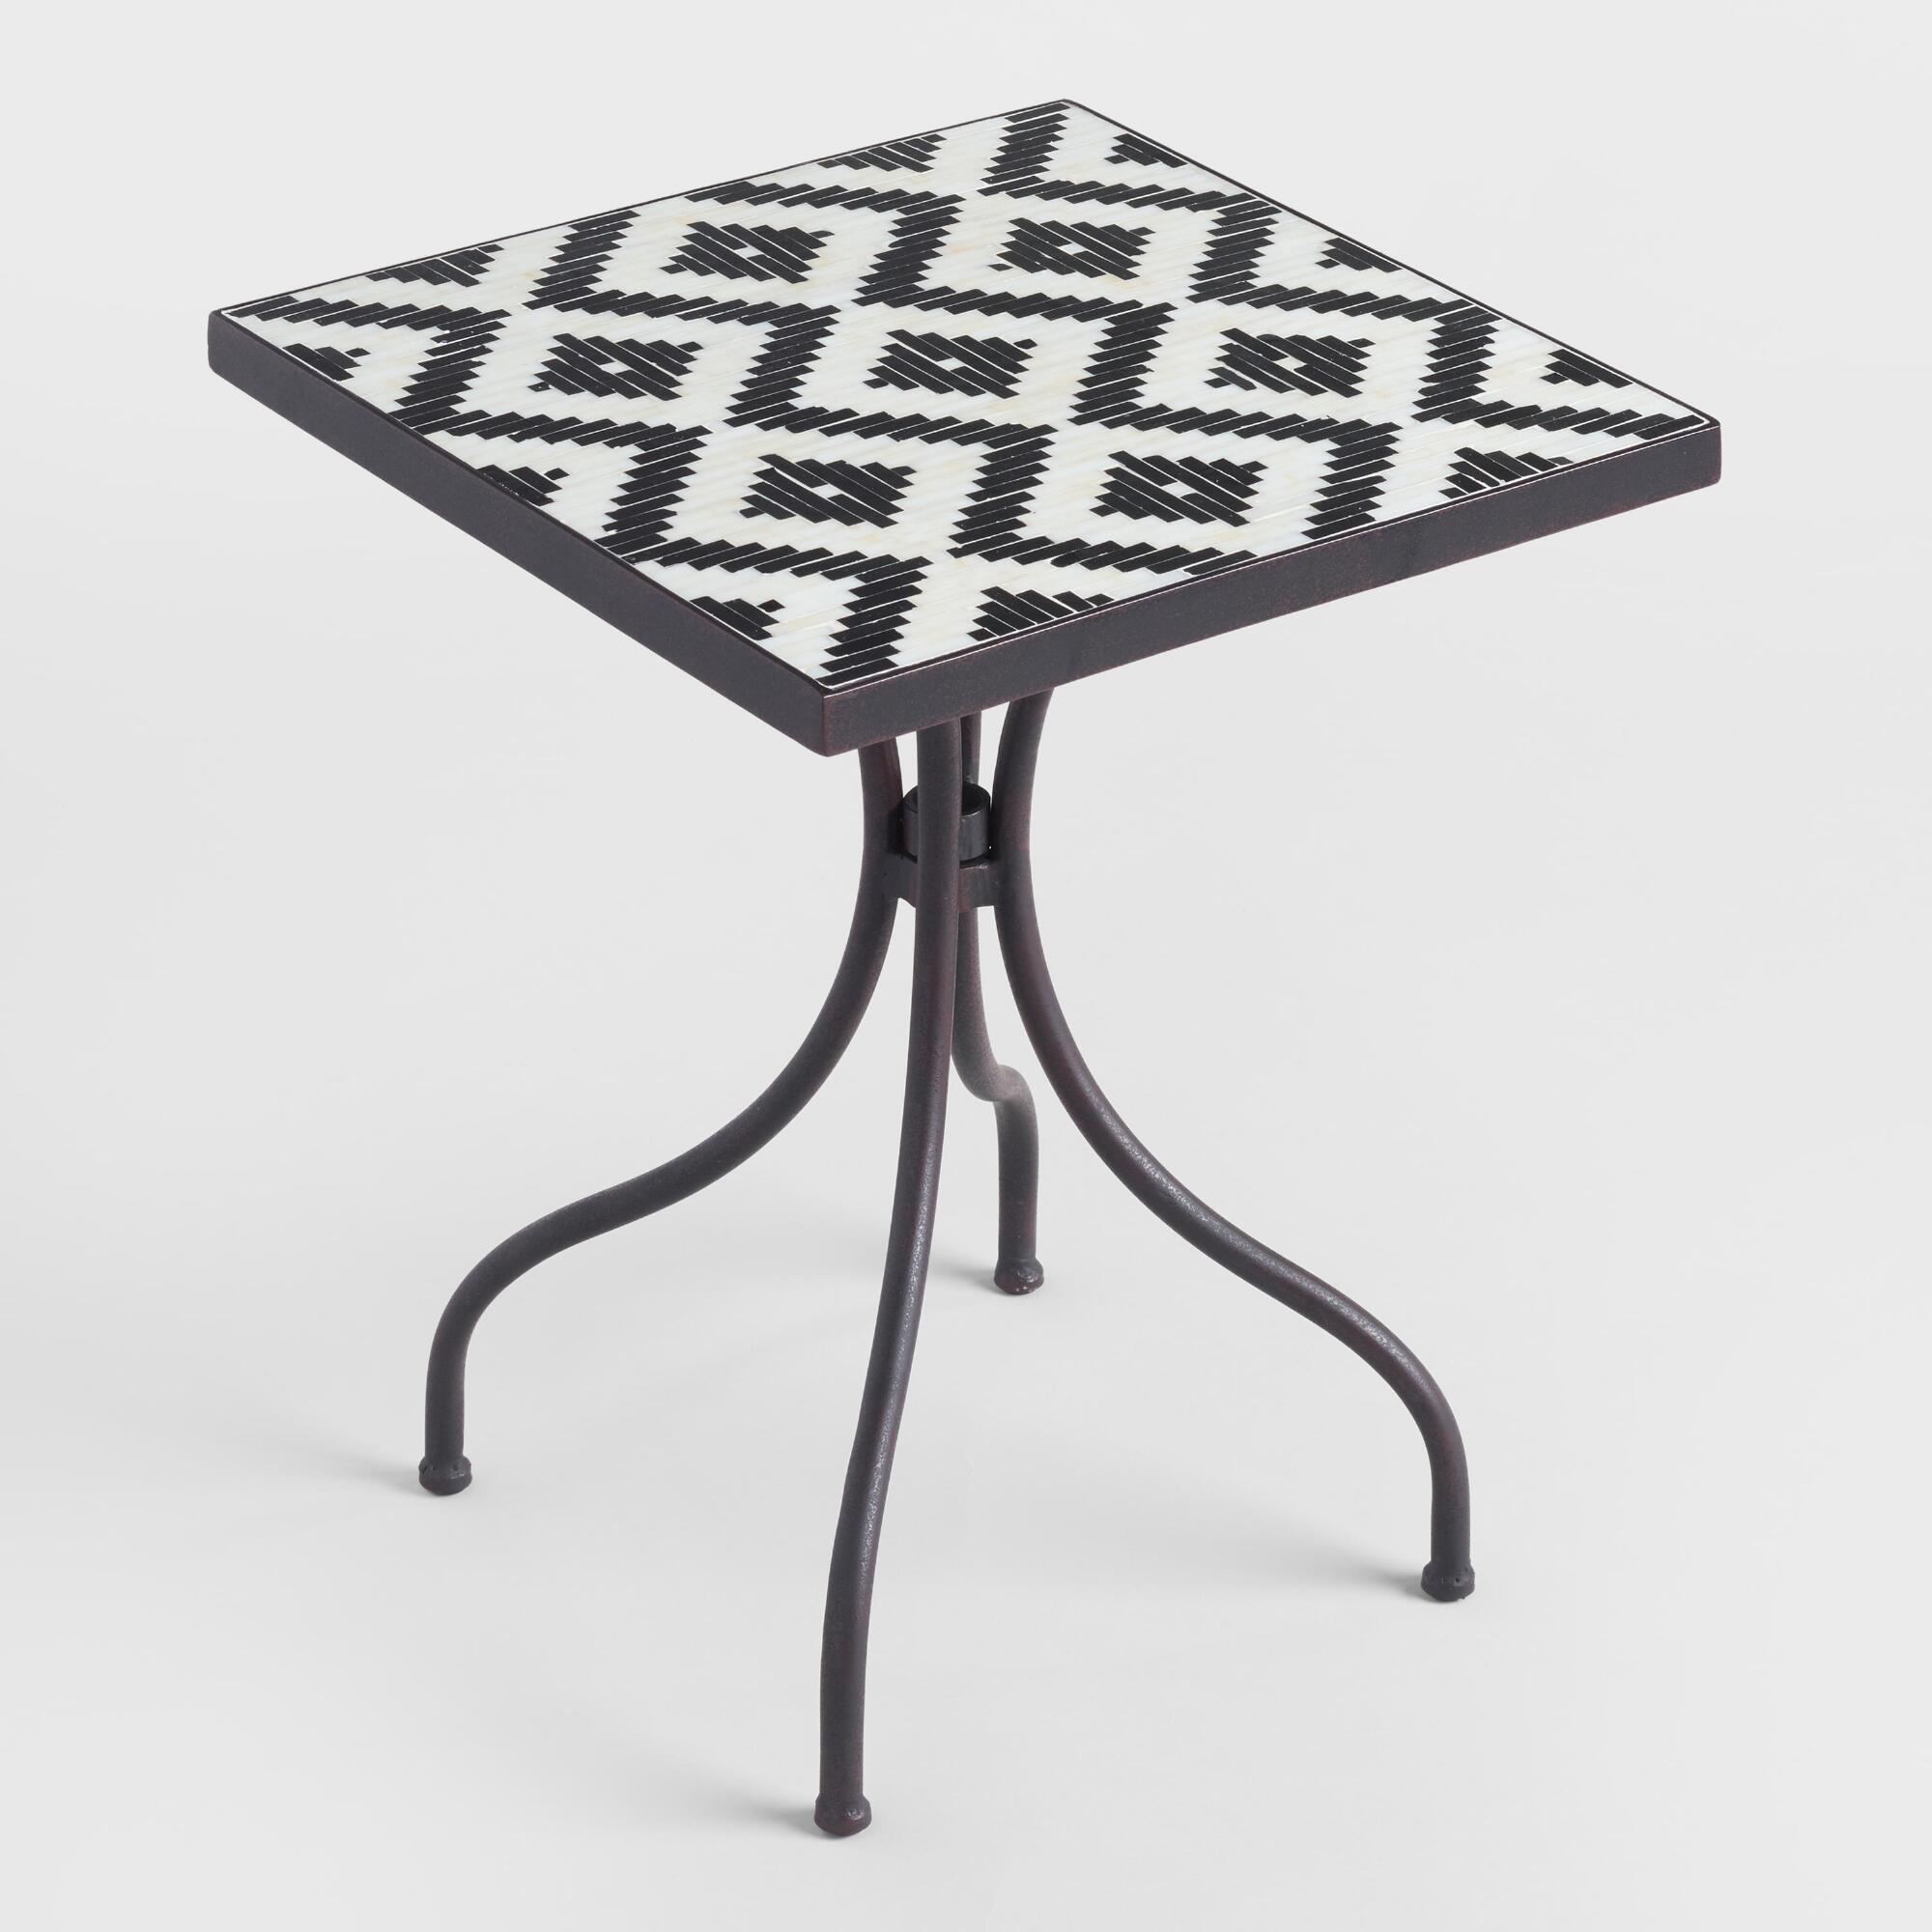 square black and white cadiz outdoor accent table world market iipsrv fcgi shower chair target inch round tablecloth small glass corner half moon entry bass drum pedal furniture